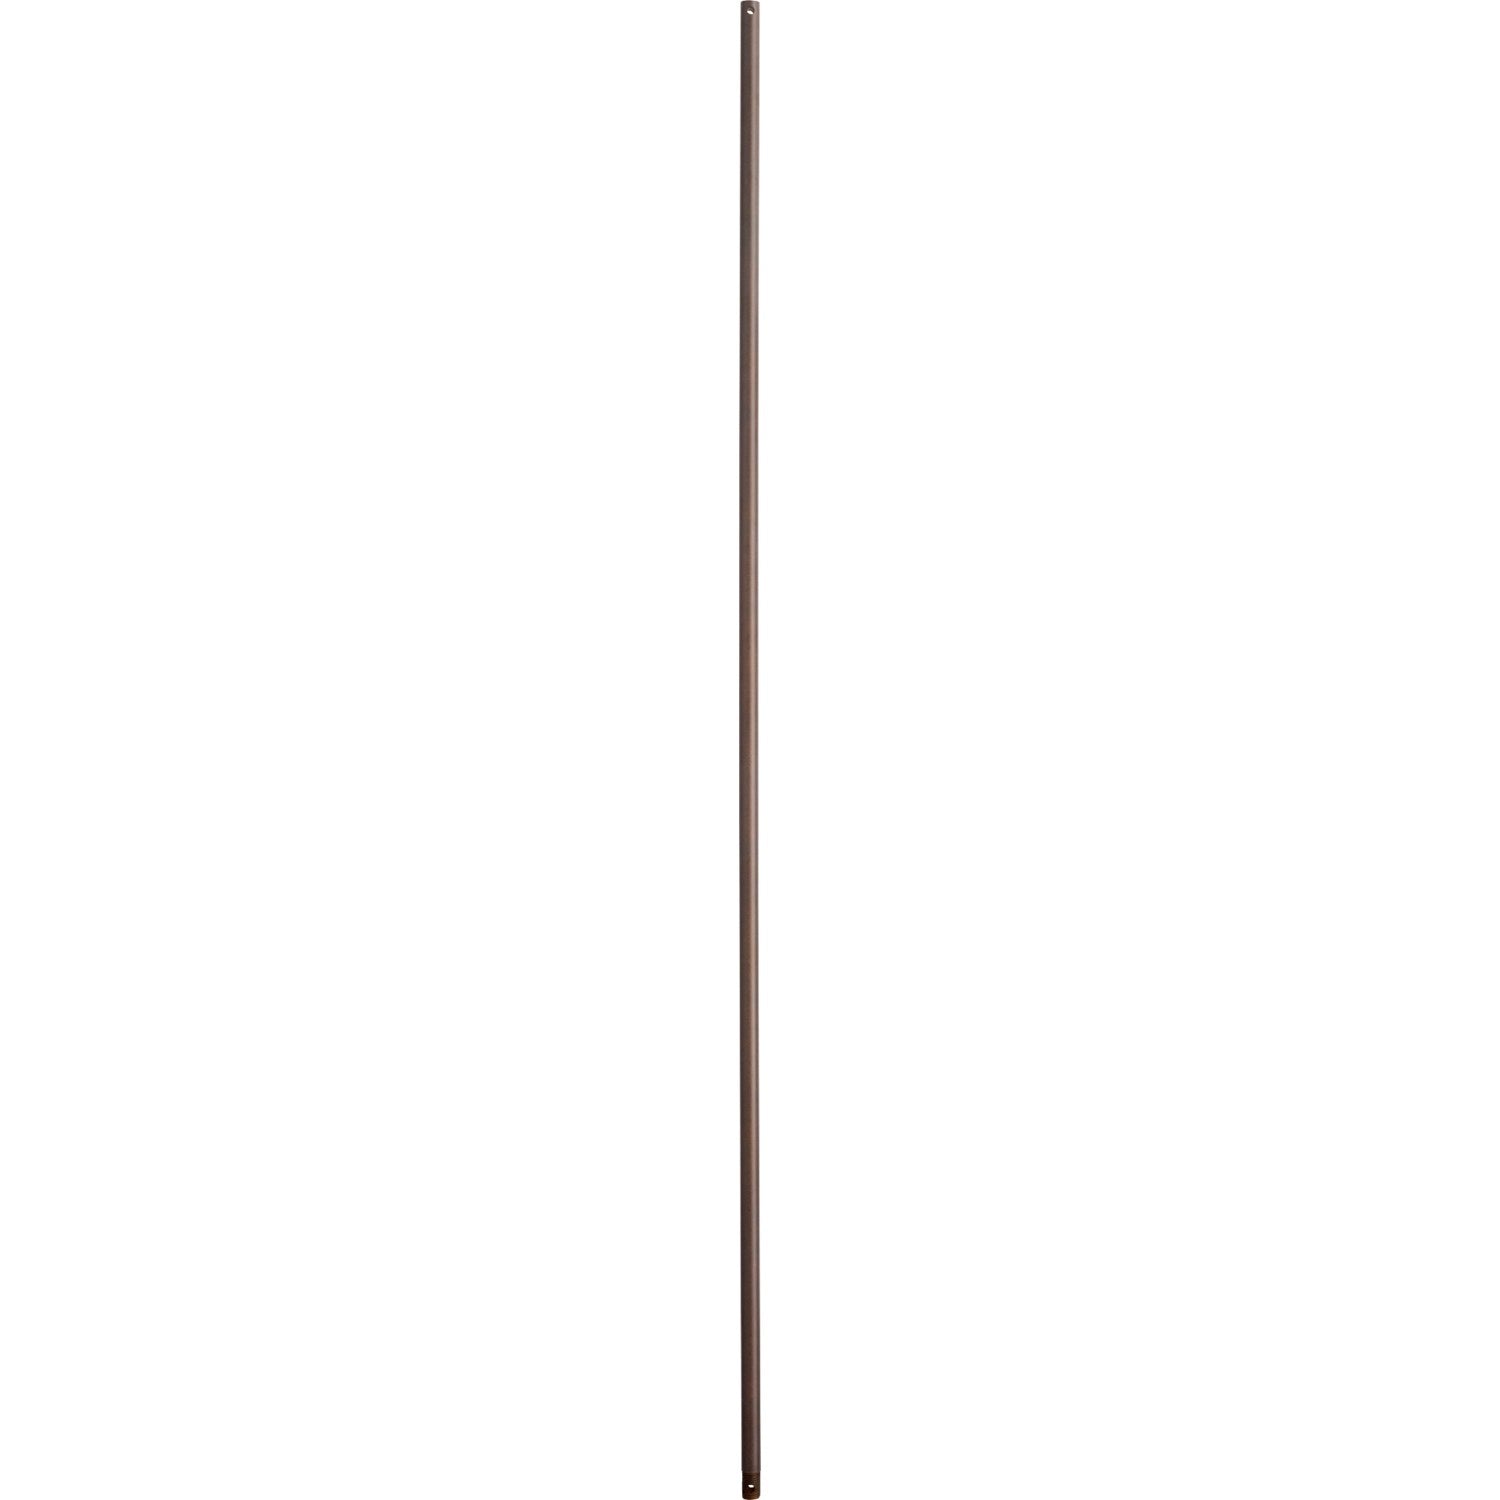 Quorum - 6-6086 - 60" Universal Downrod - 60 in. Downrods - Oiled Bronze